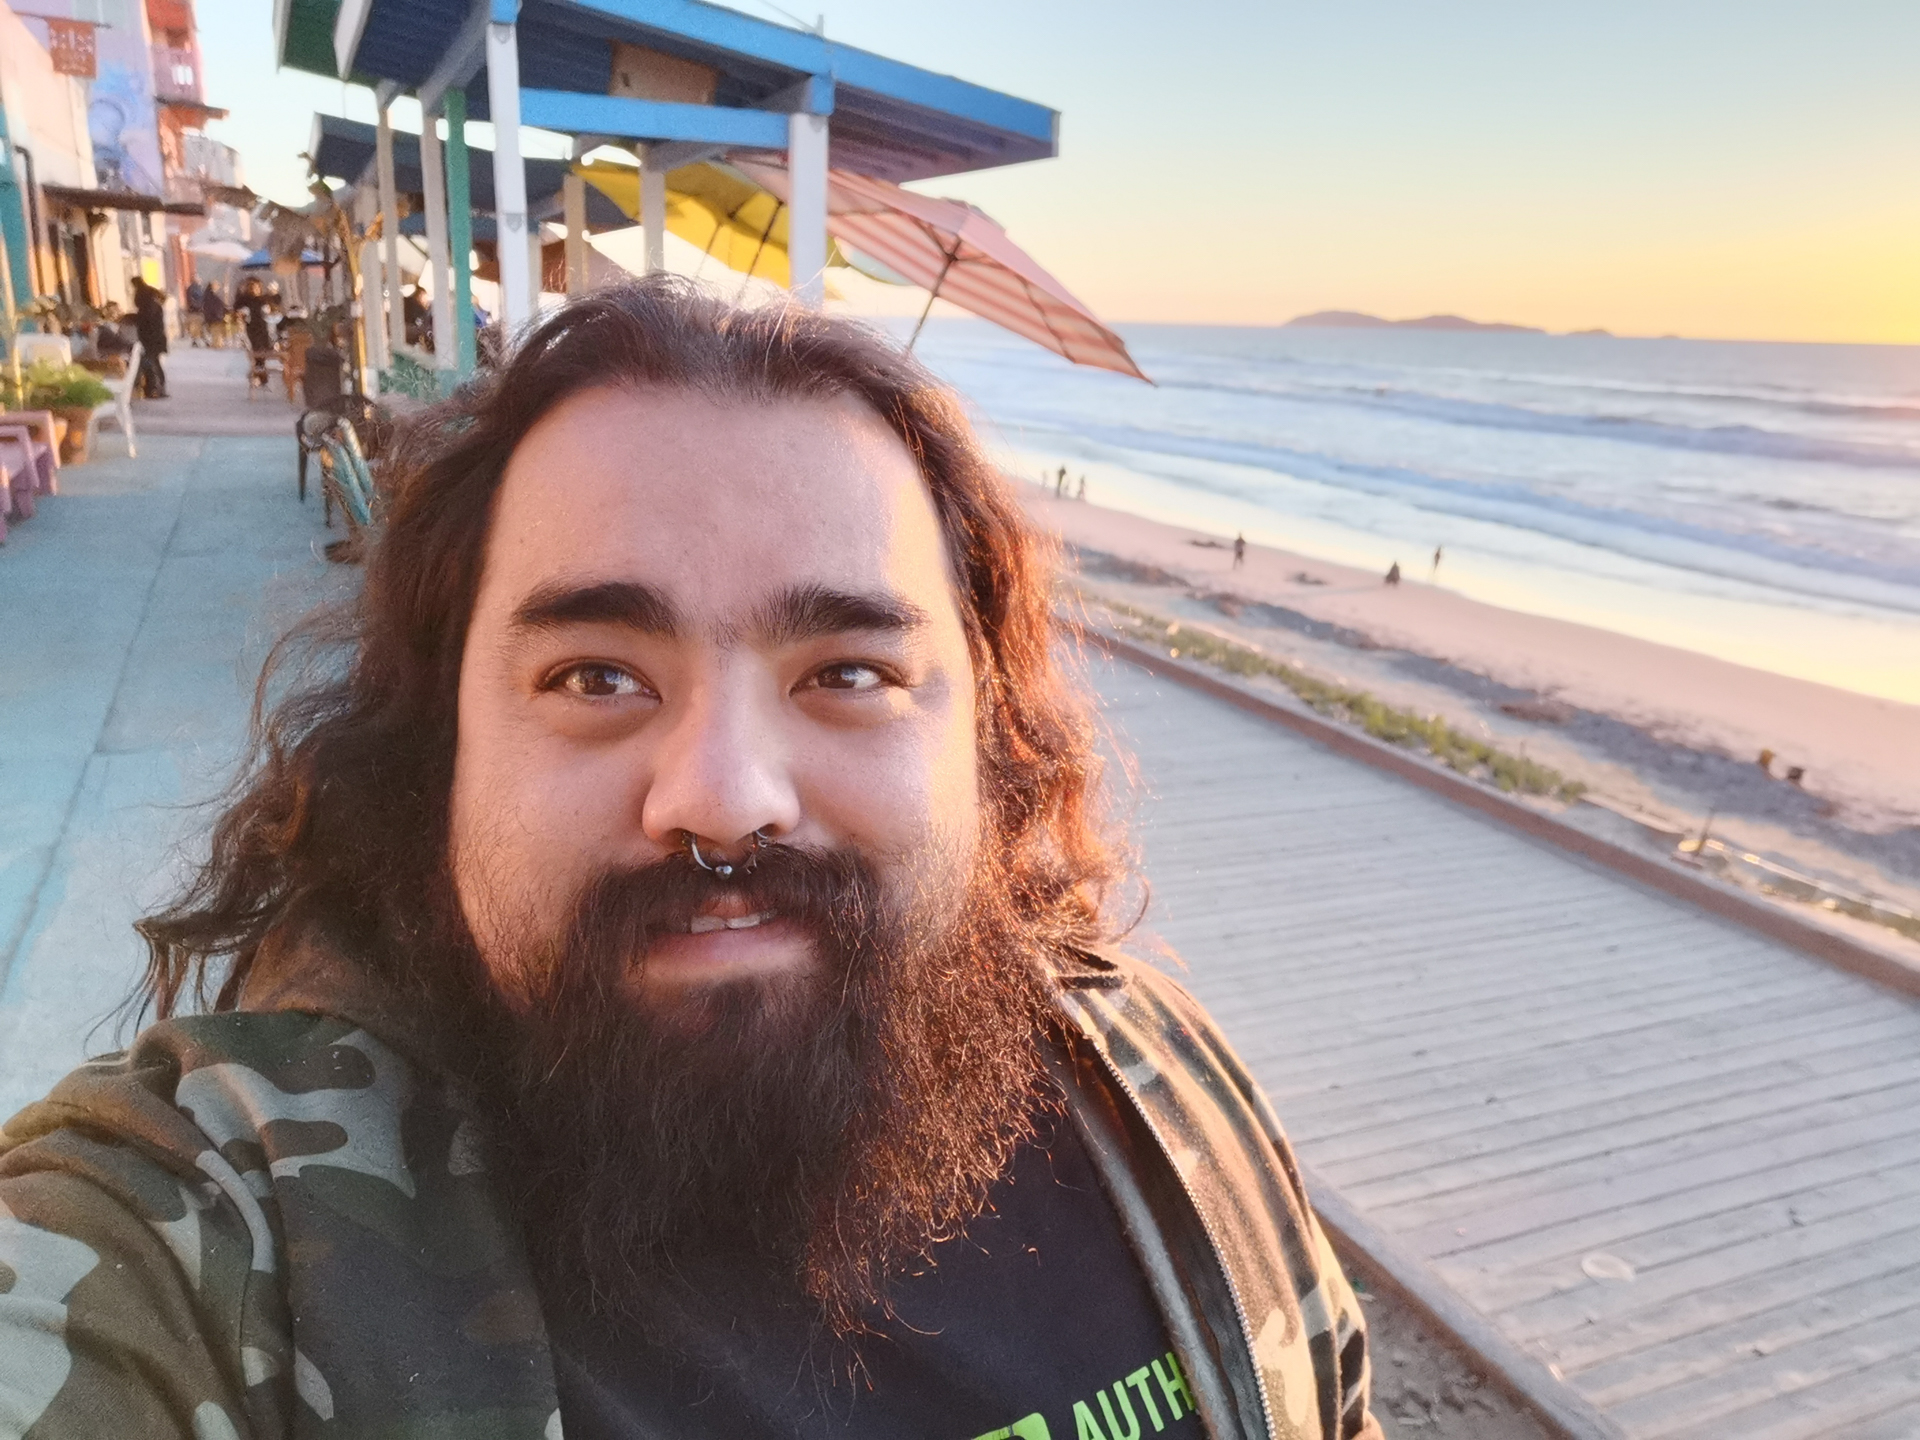 Selfie with HUAWEI Mate 20 Pro front camera